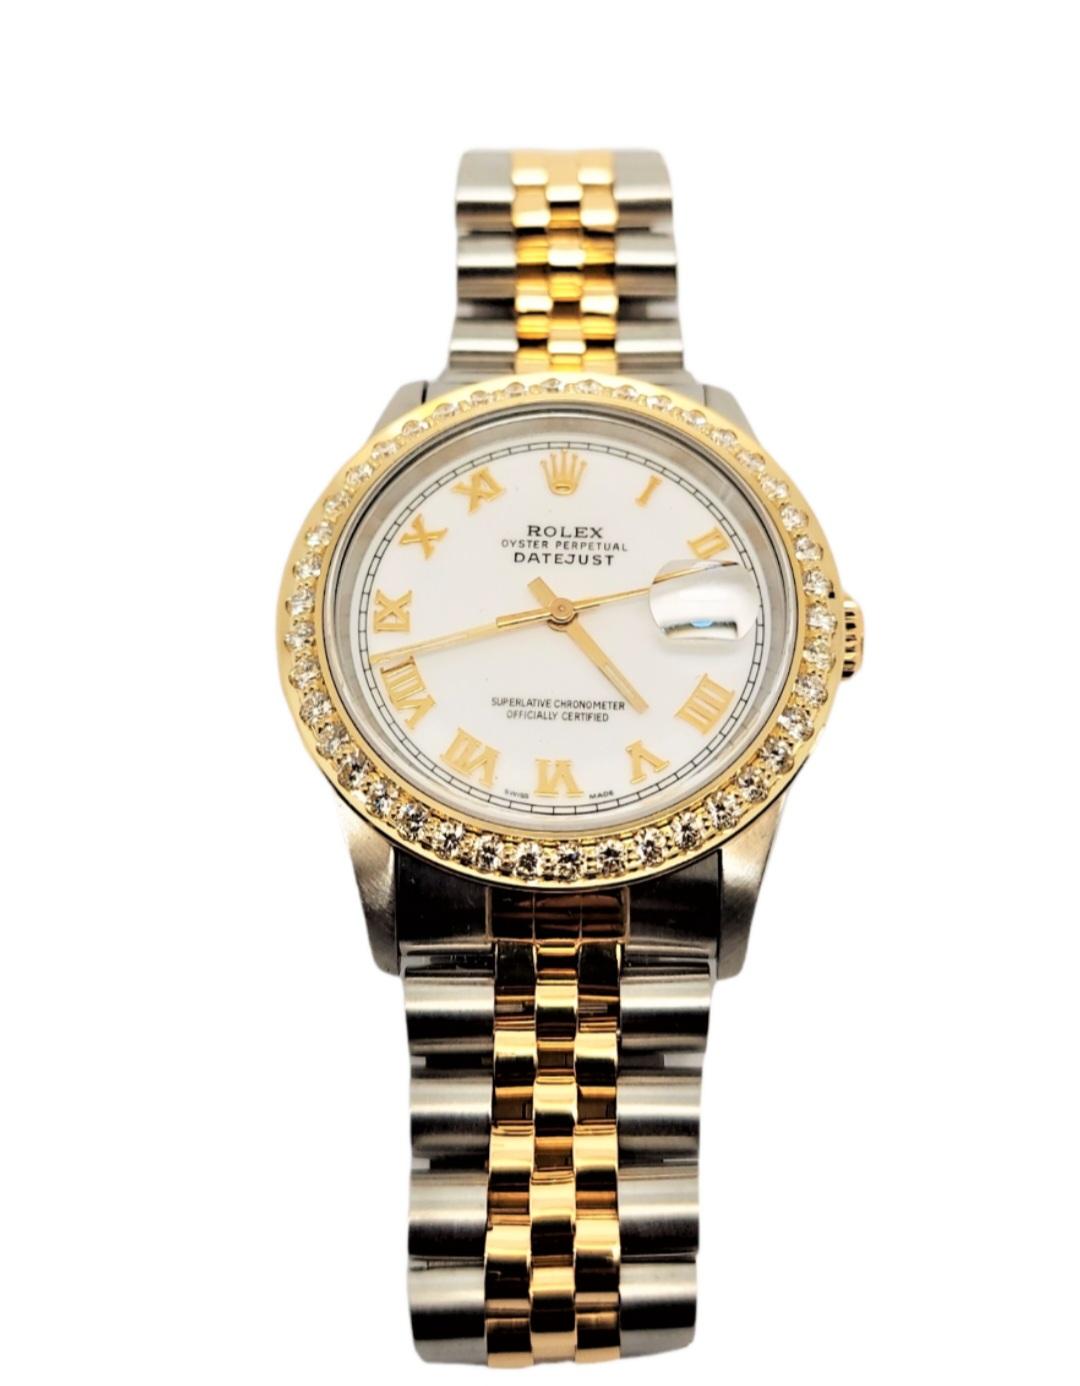 Brand - Rolex
Gender - Unisex
Metals - stainless steel / yellow gold 
Model - 16233 Datejust 
Case size - 36mm
Bezel - Yellow Gold fluted 
Crystal - Sapphire
Dial - White Roman Numeral 
Movement - Automatic CAL-3135
Wrist Band - two tone